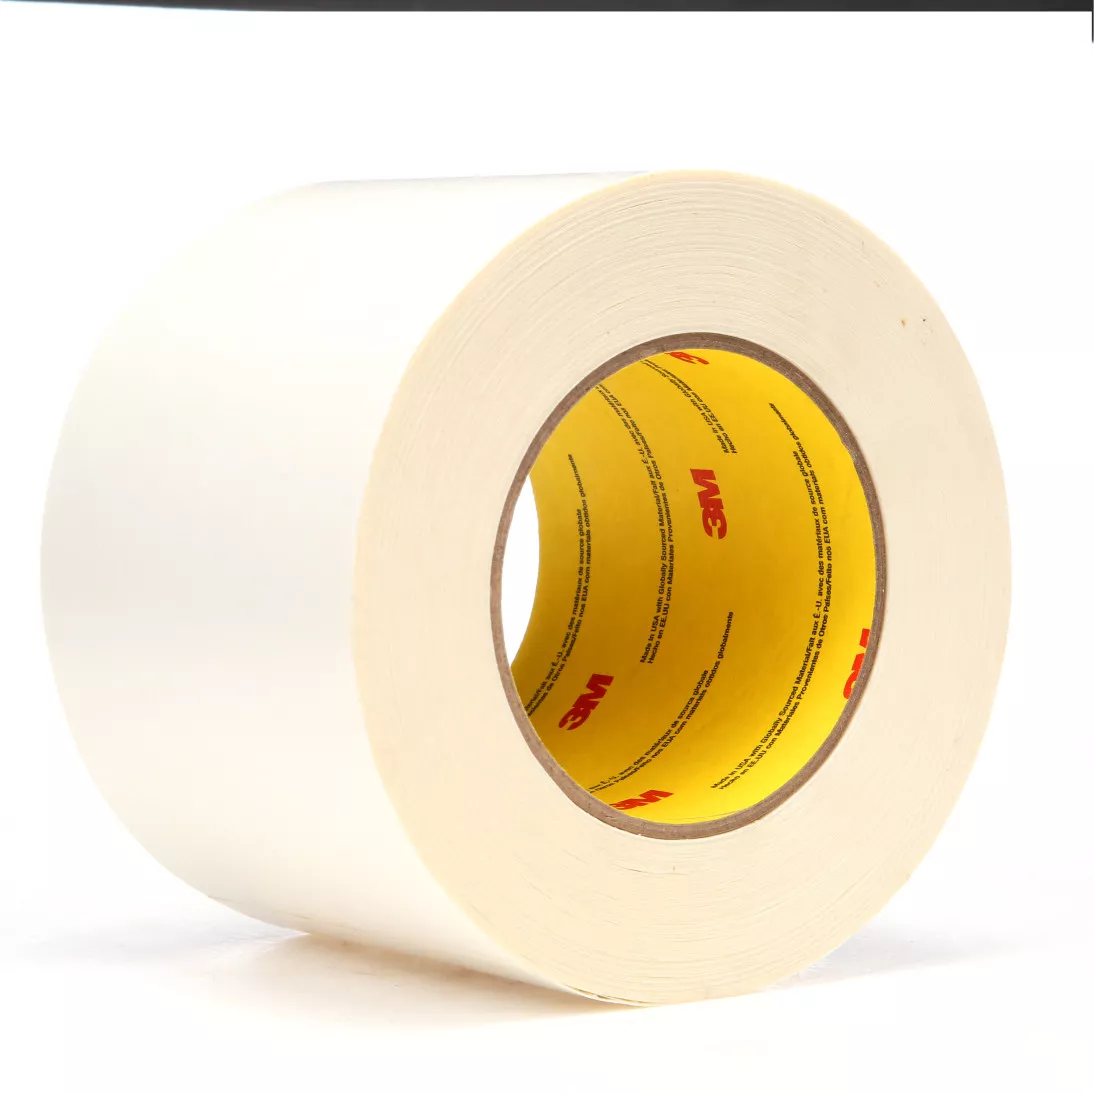 3M™ Repulpable Double Coated Splicing Tape 9038W, White, 72 mm x 33 m, 3
mil, 12 rolls per case